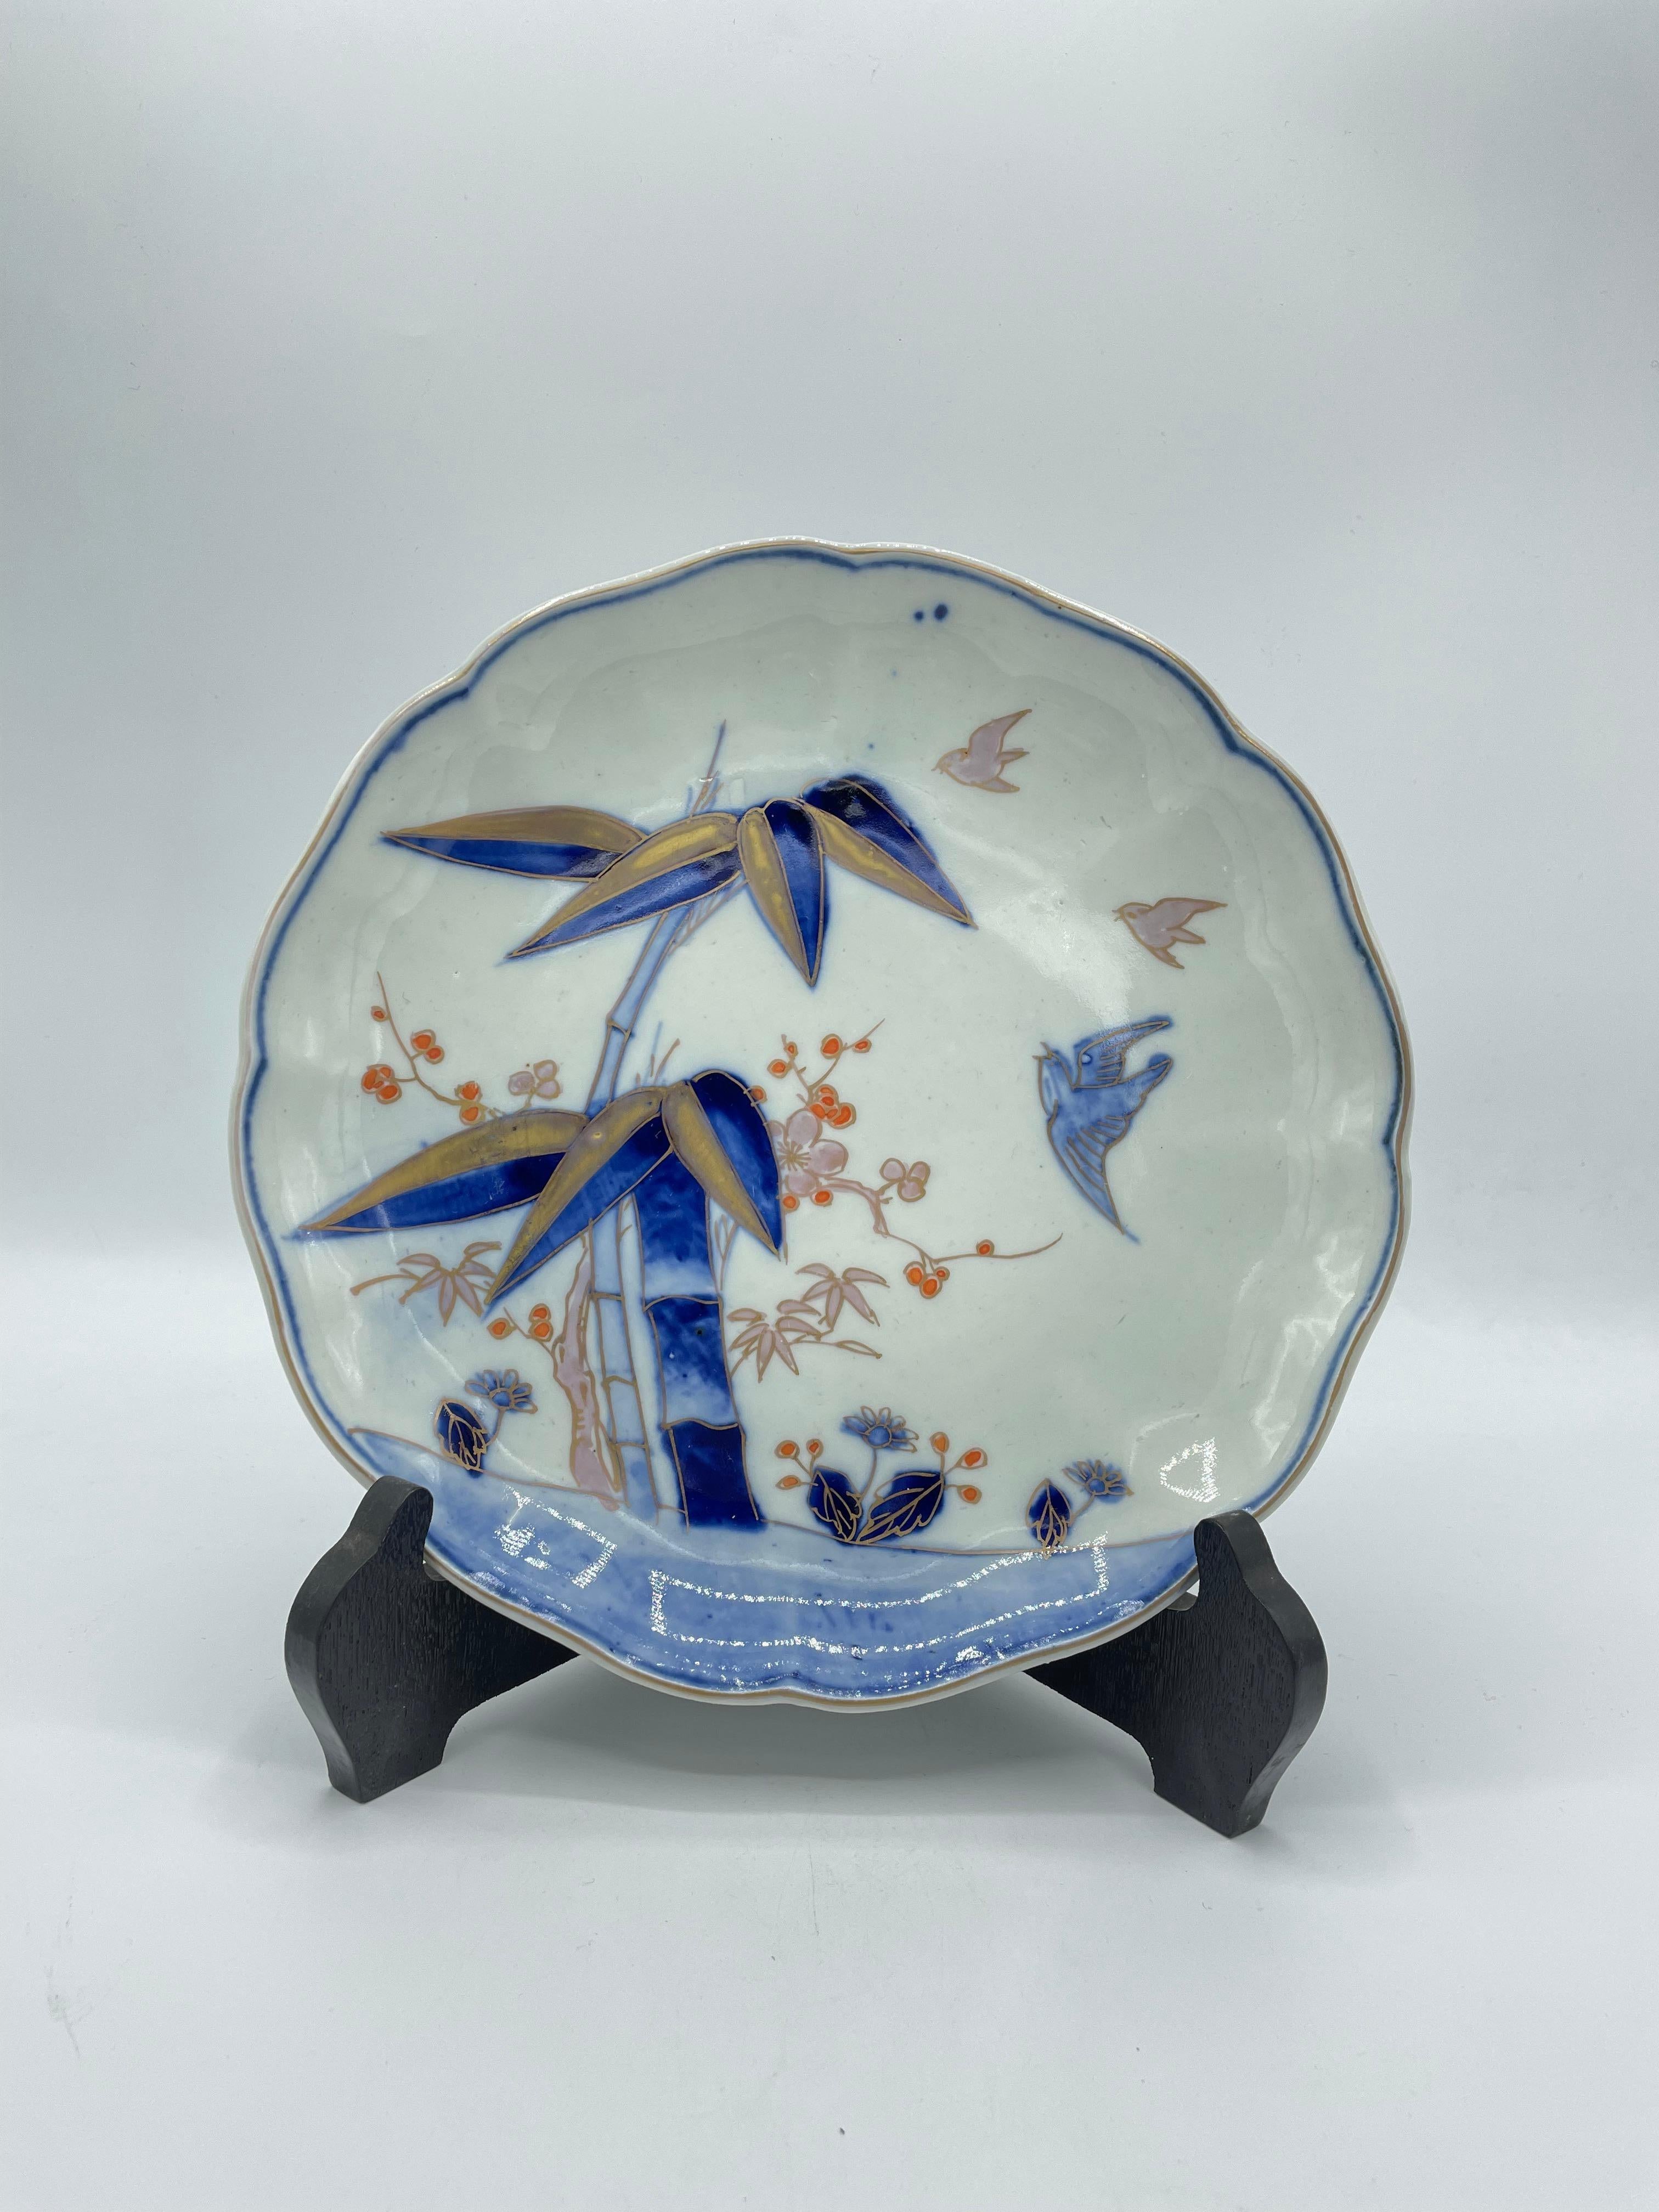 This plate was made in Japan around 1980s in Showa era.
The material is porcelain and the design is some bamboo and birds.
It can be used as decoration and also serving. 

Dimensions:22 x 22 x H3.5 cm

Pottery and porcelain (tōjiki, also yakimono,